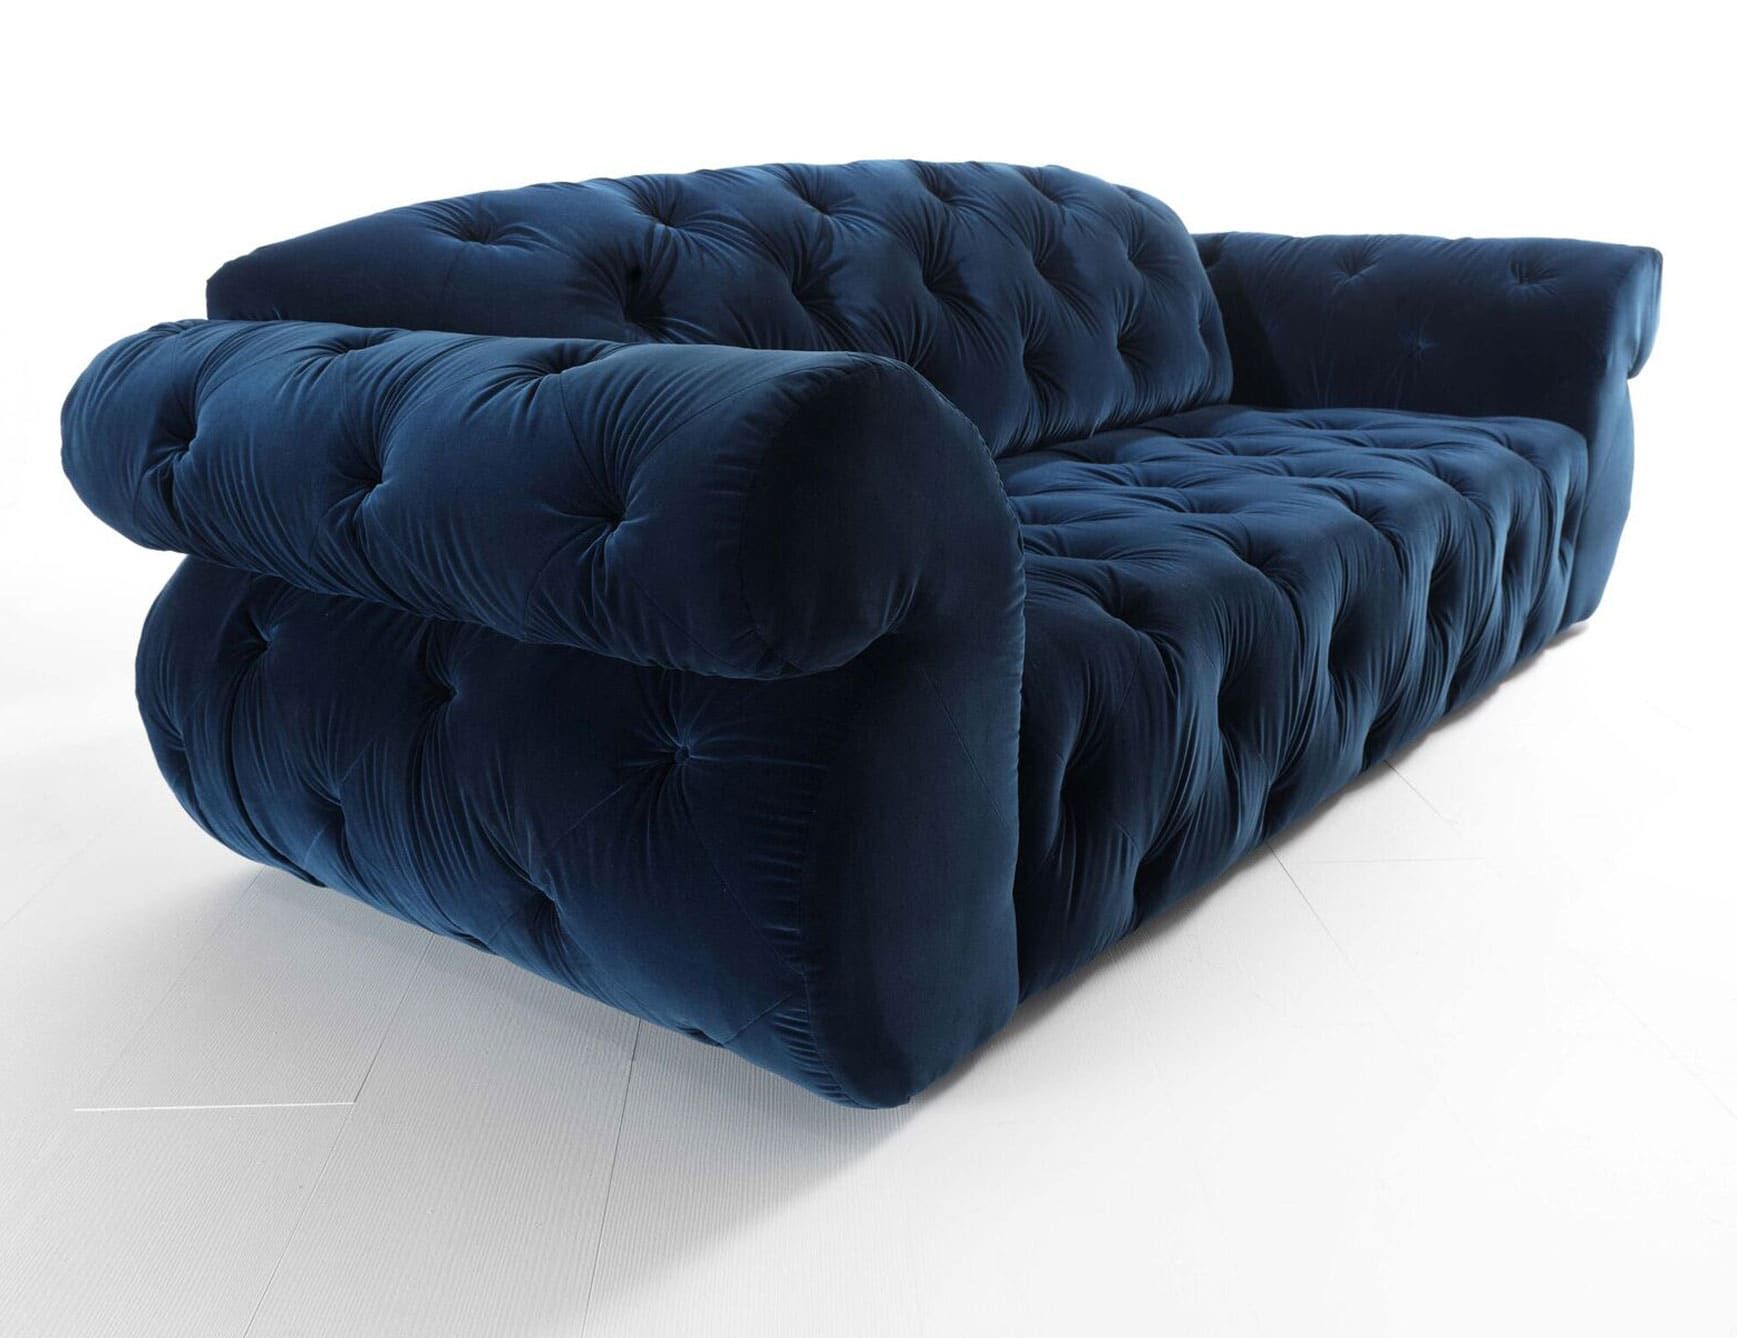 Paramount modern Italian sofa chair with blue leather